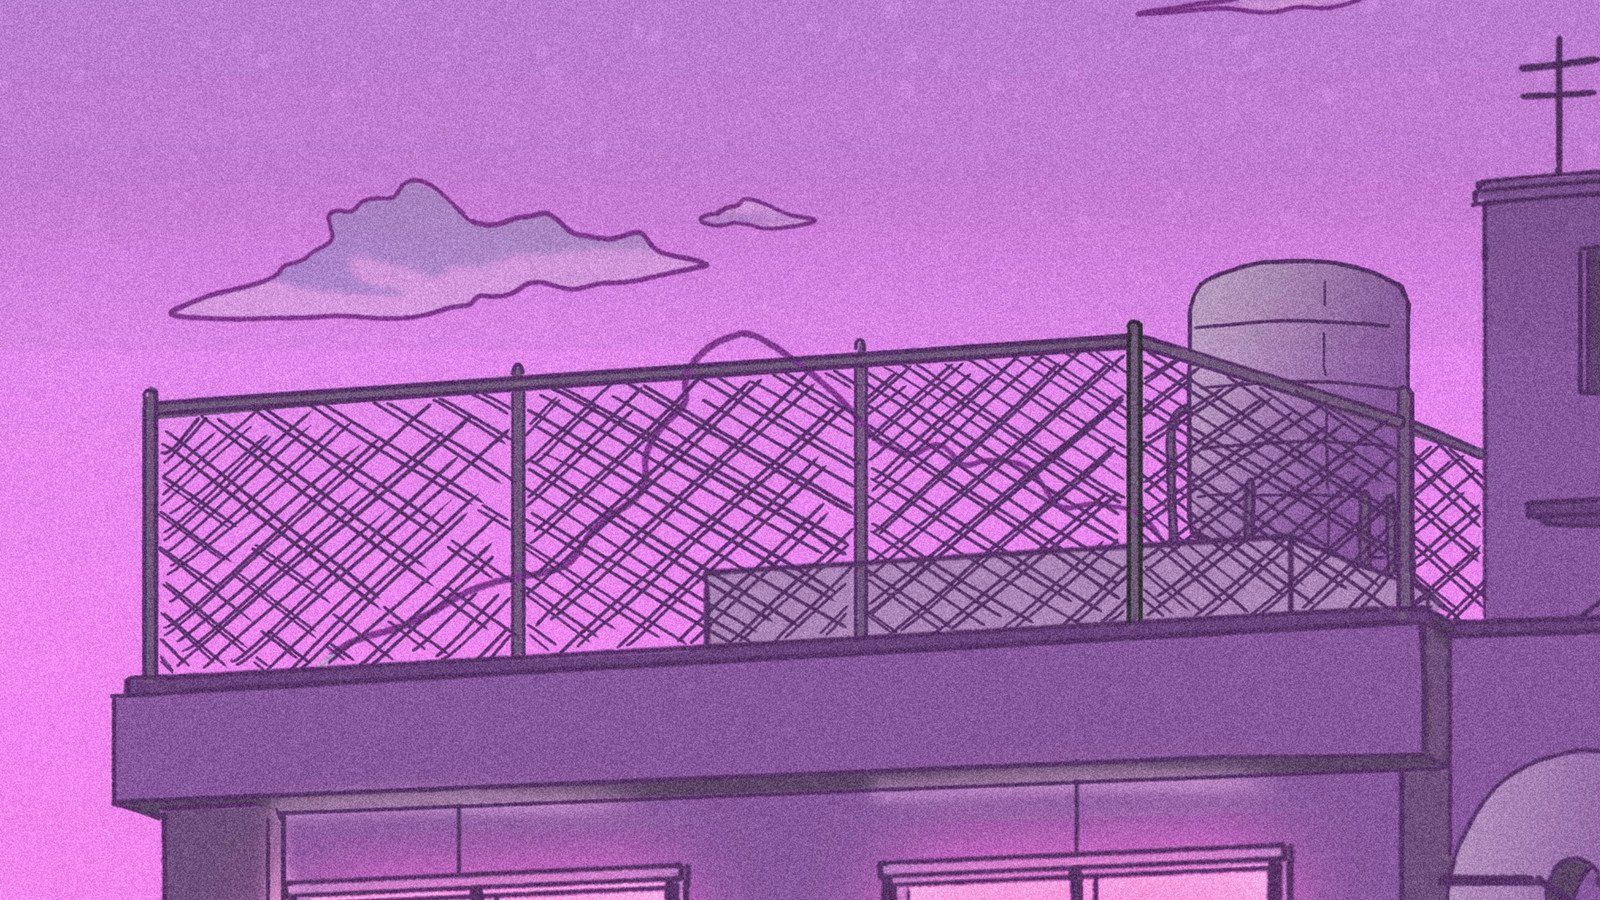 A purple illustration of a building with a fence on the roof - 90s, 90s anime